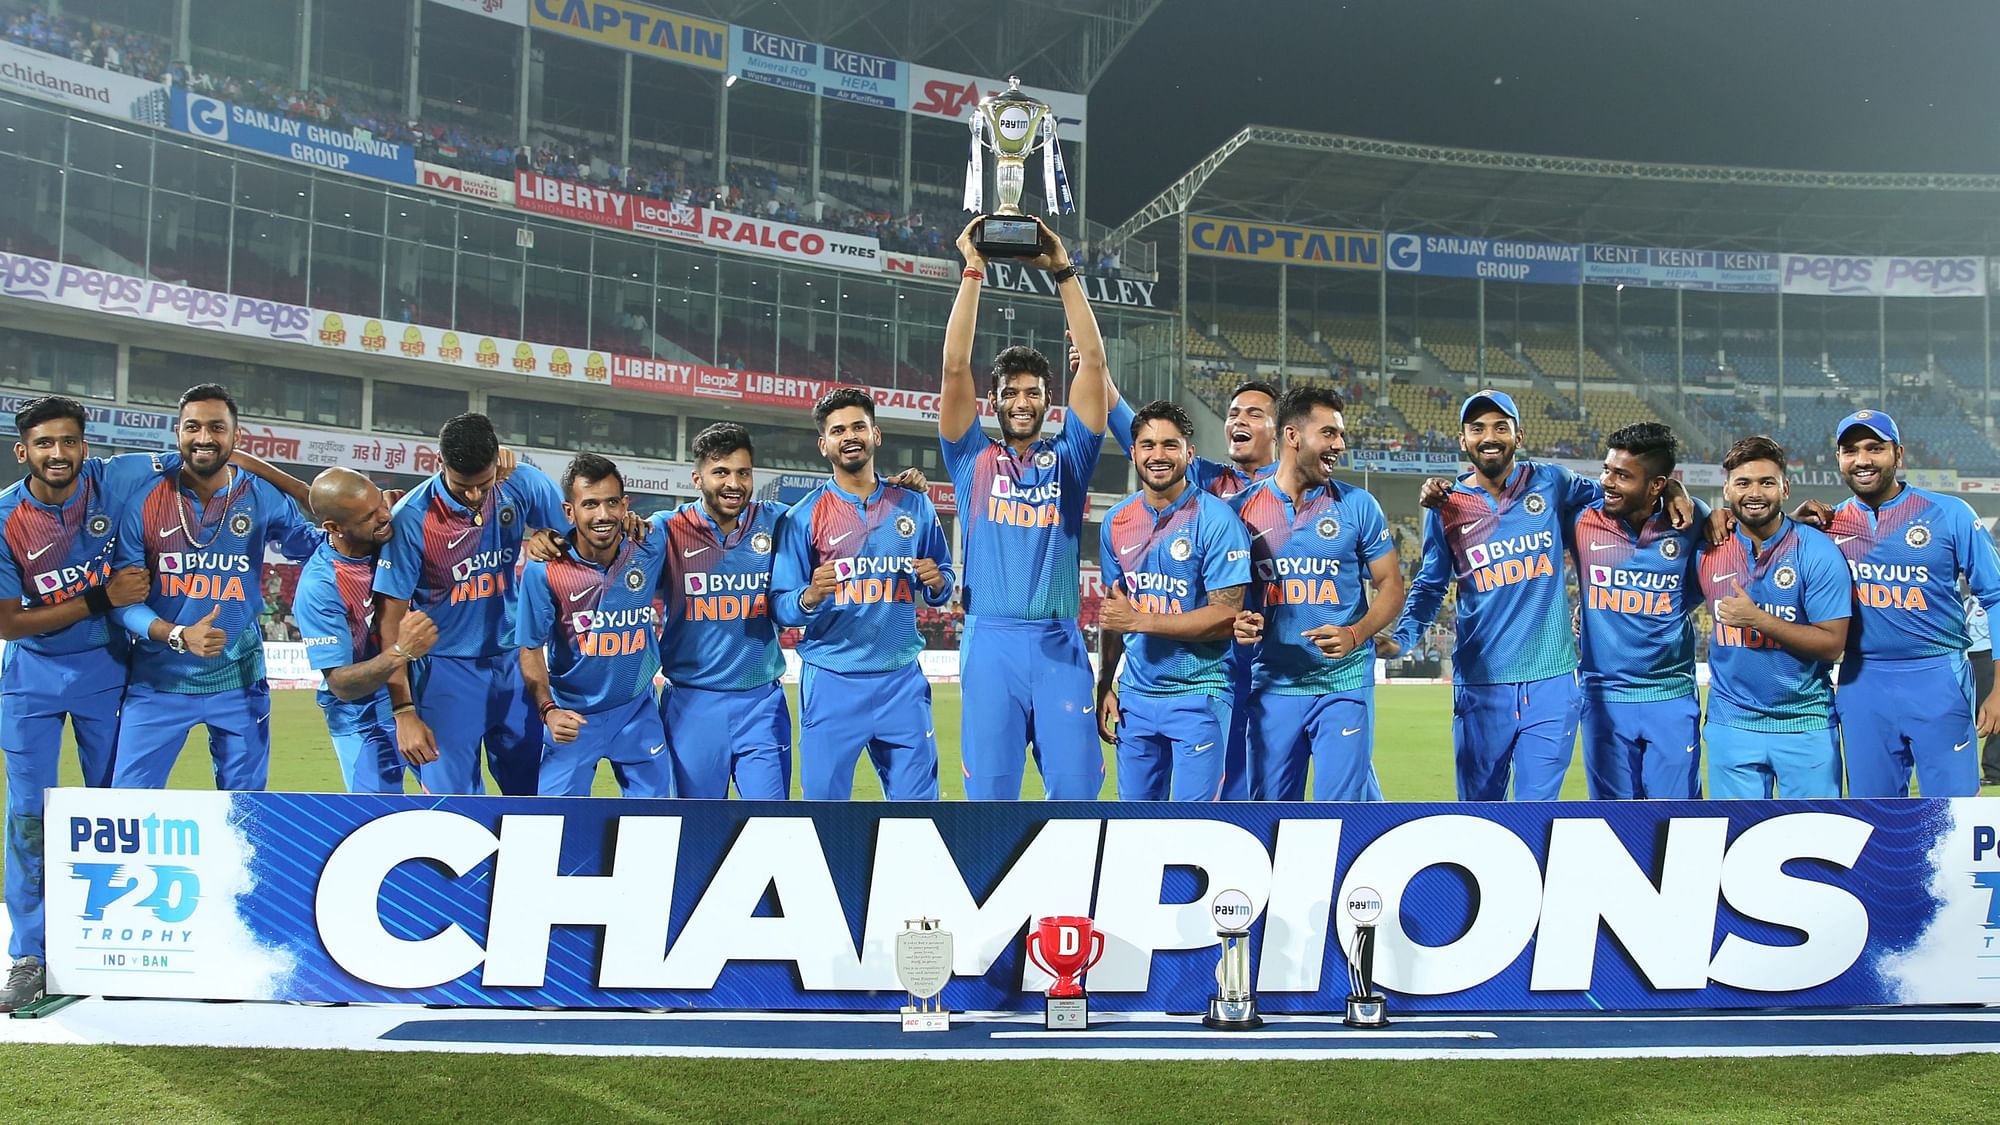 The Indian team celebrate the series win over Bangladesh after the Nagpur T20I on Sunday at the Vidarbha Cricket Association Stadium, Nagpur on the 10th November 2019.